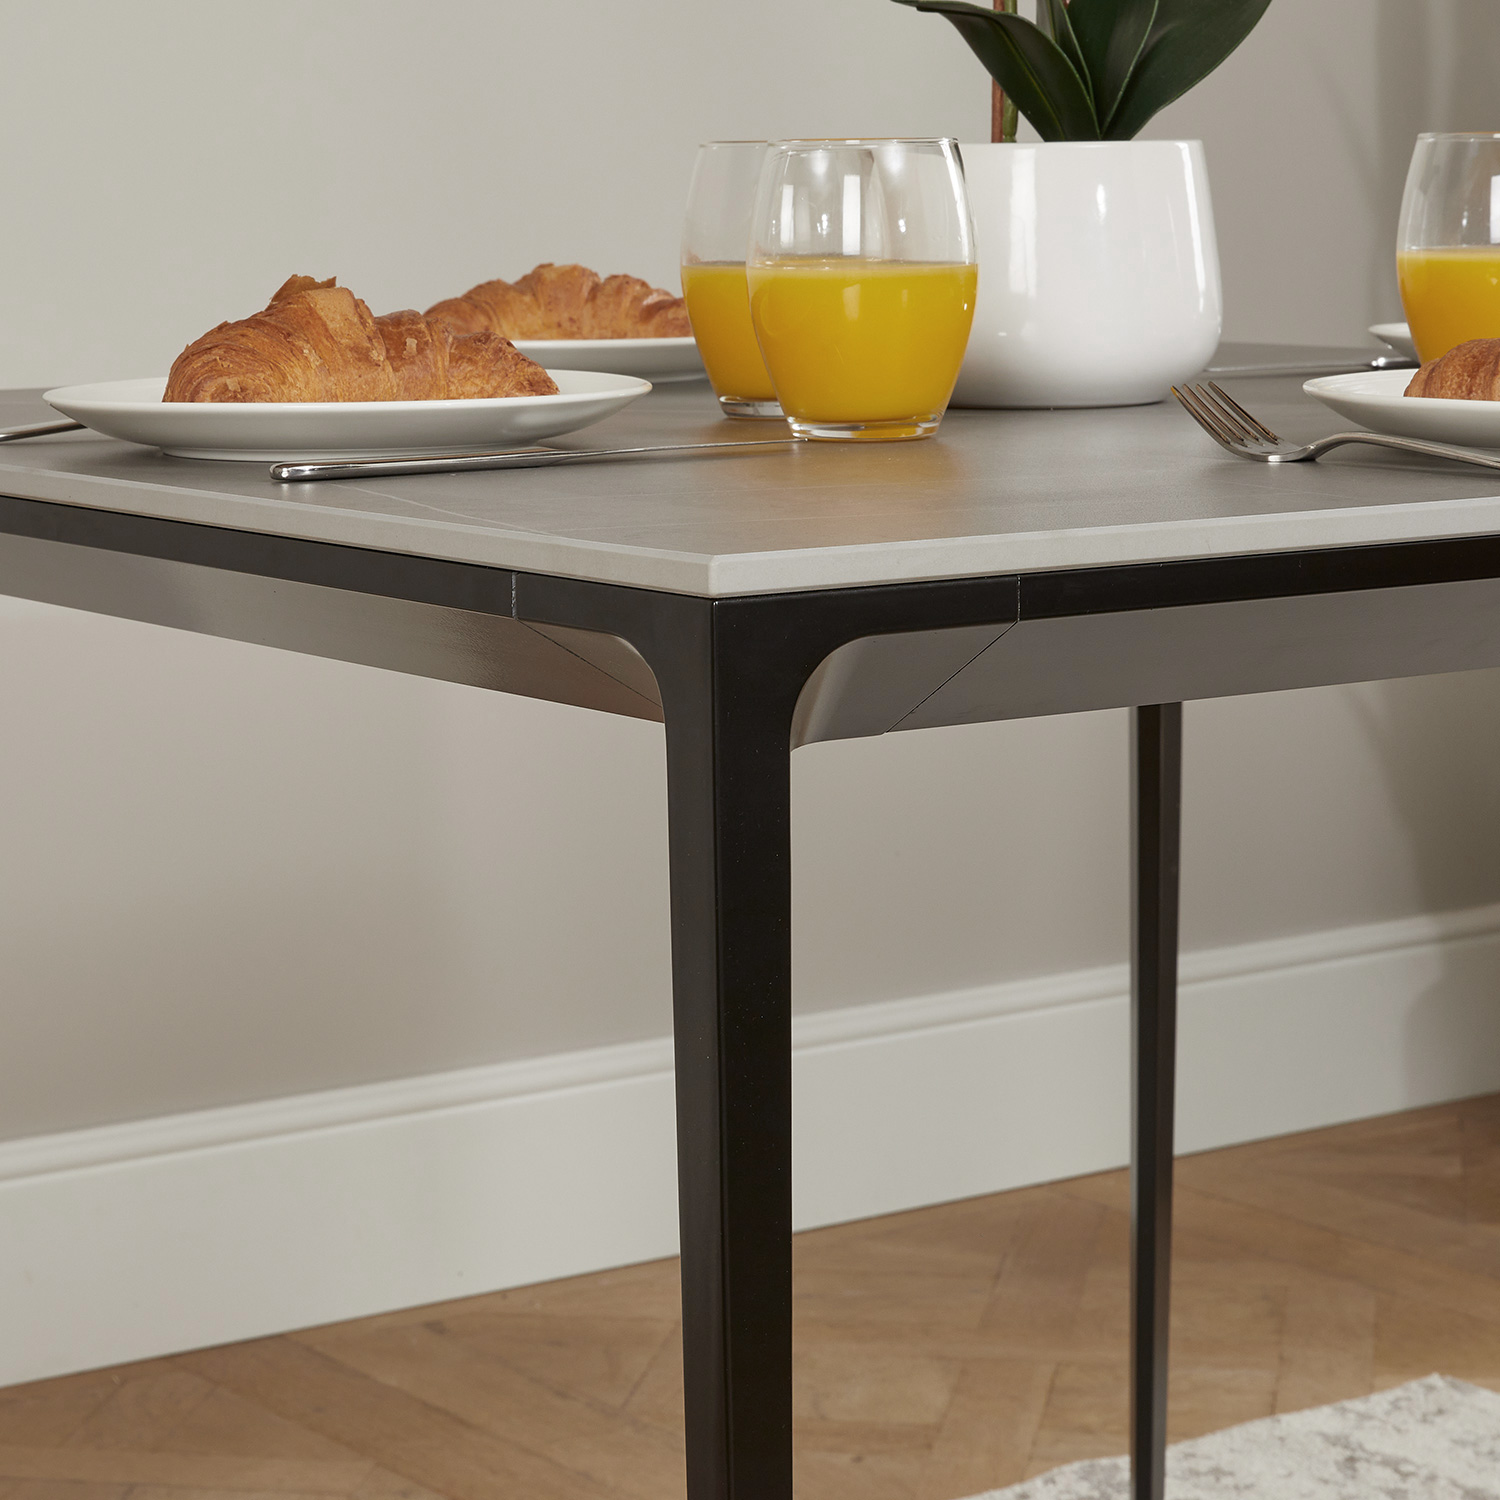 Bellagio 90cm Grey Sintered Stone Square Dining Table with Black Contemporary Base